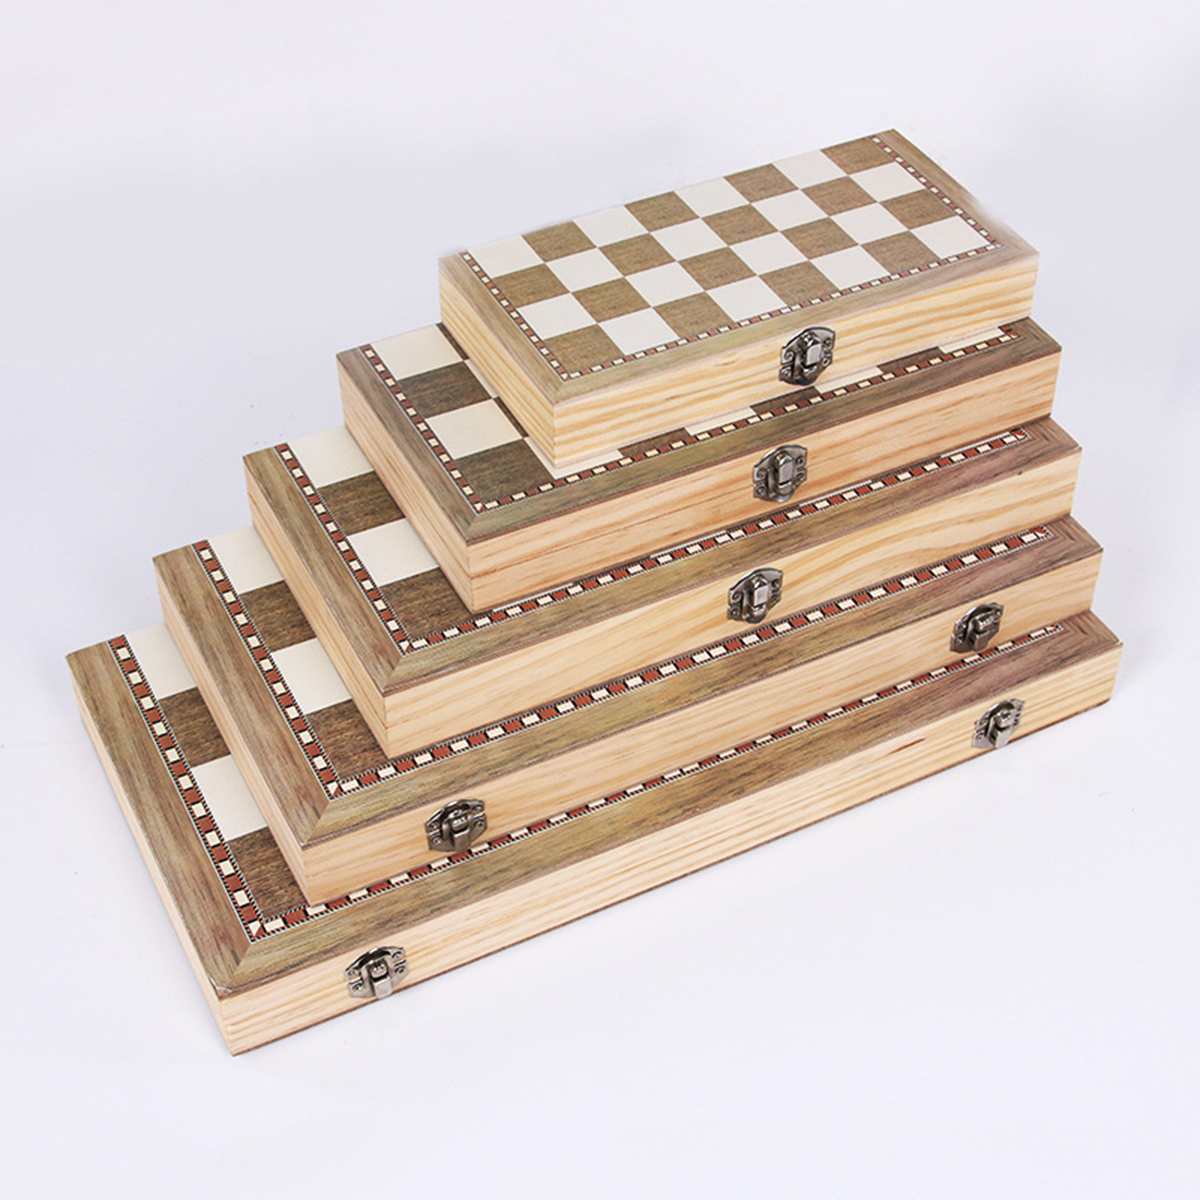 Wooden Chess Set Folding Magnetic Large Board With 34 Chess Pieces Interior for Storage Portable Travel Board Game Set For Kid